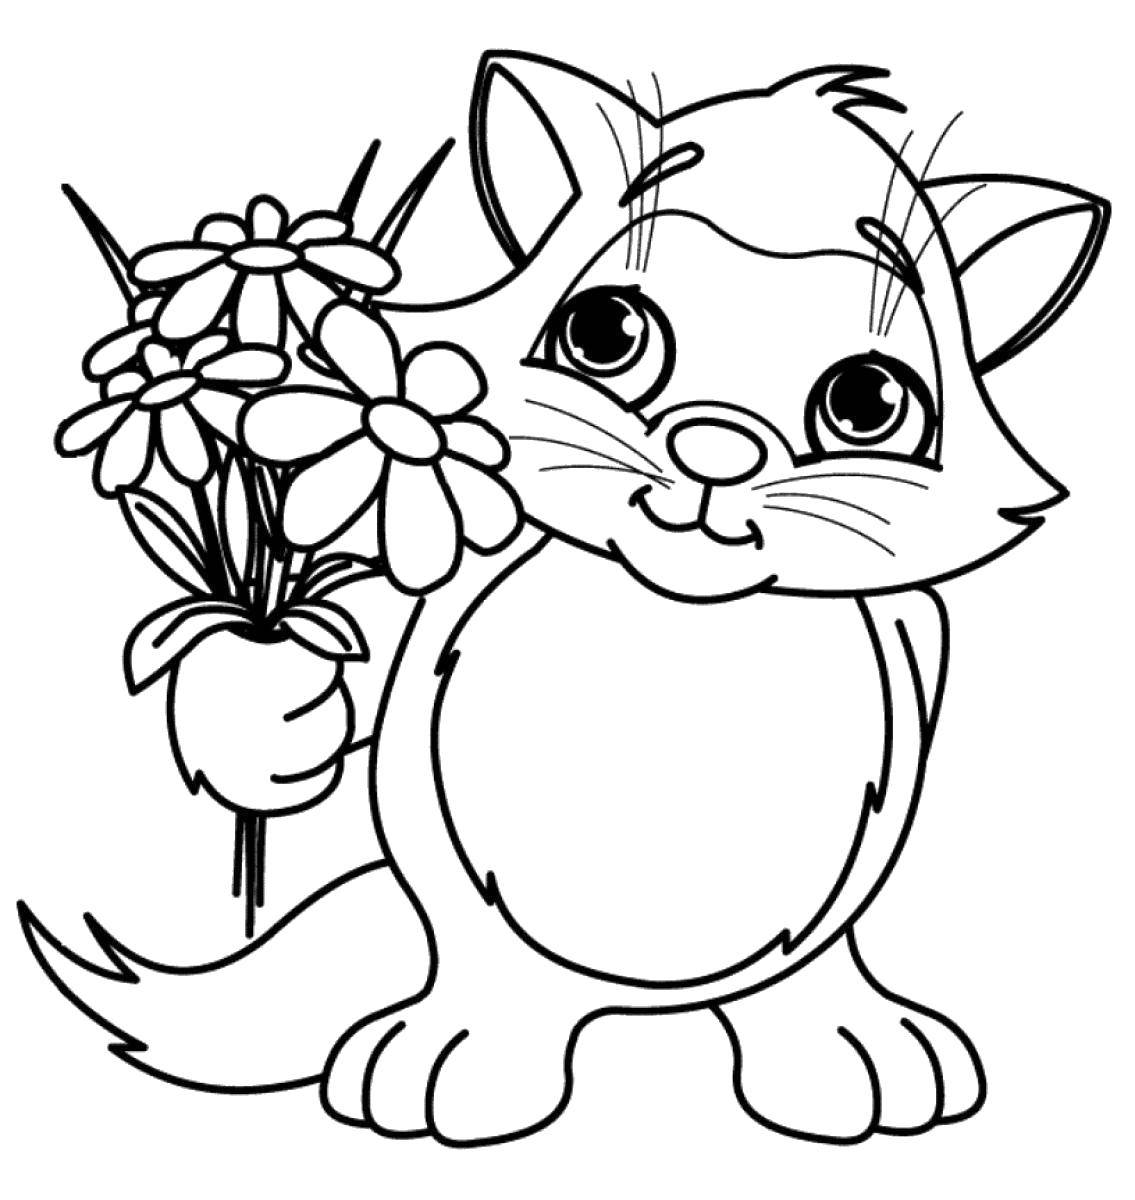 Coloring The cat gives flowers. Category Flowers. Tags:  Animals, kitten.